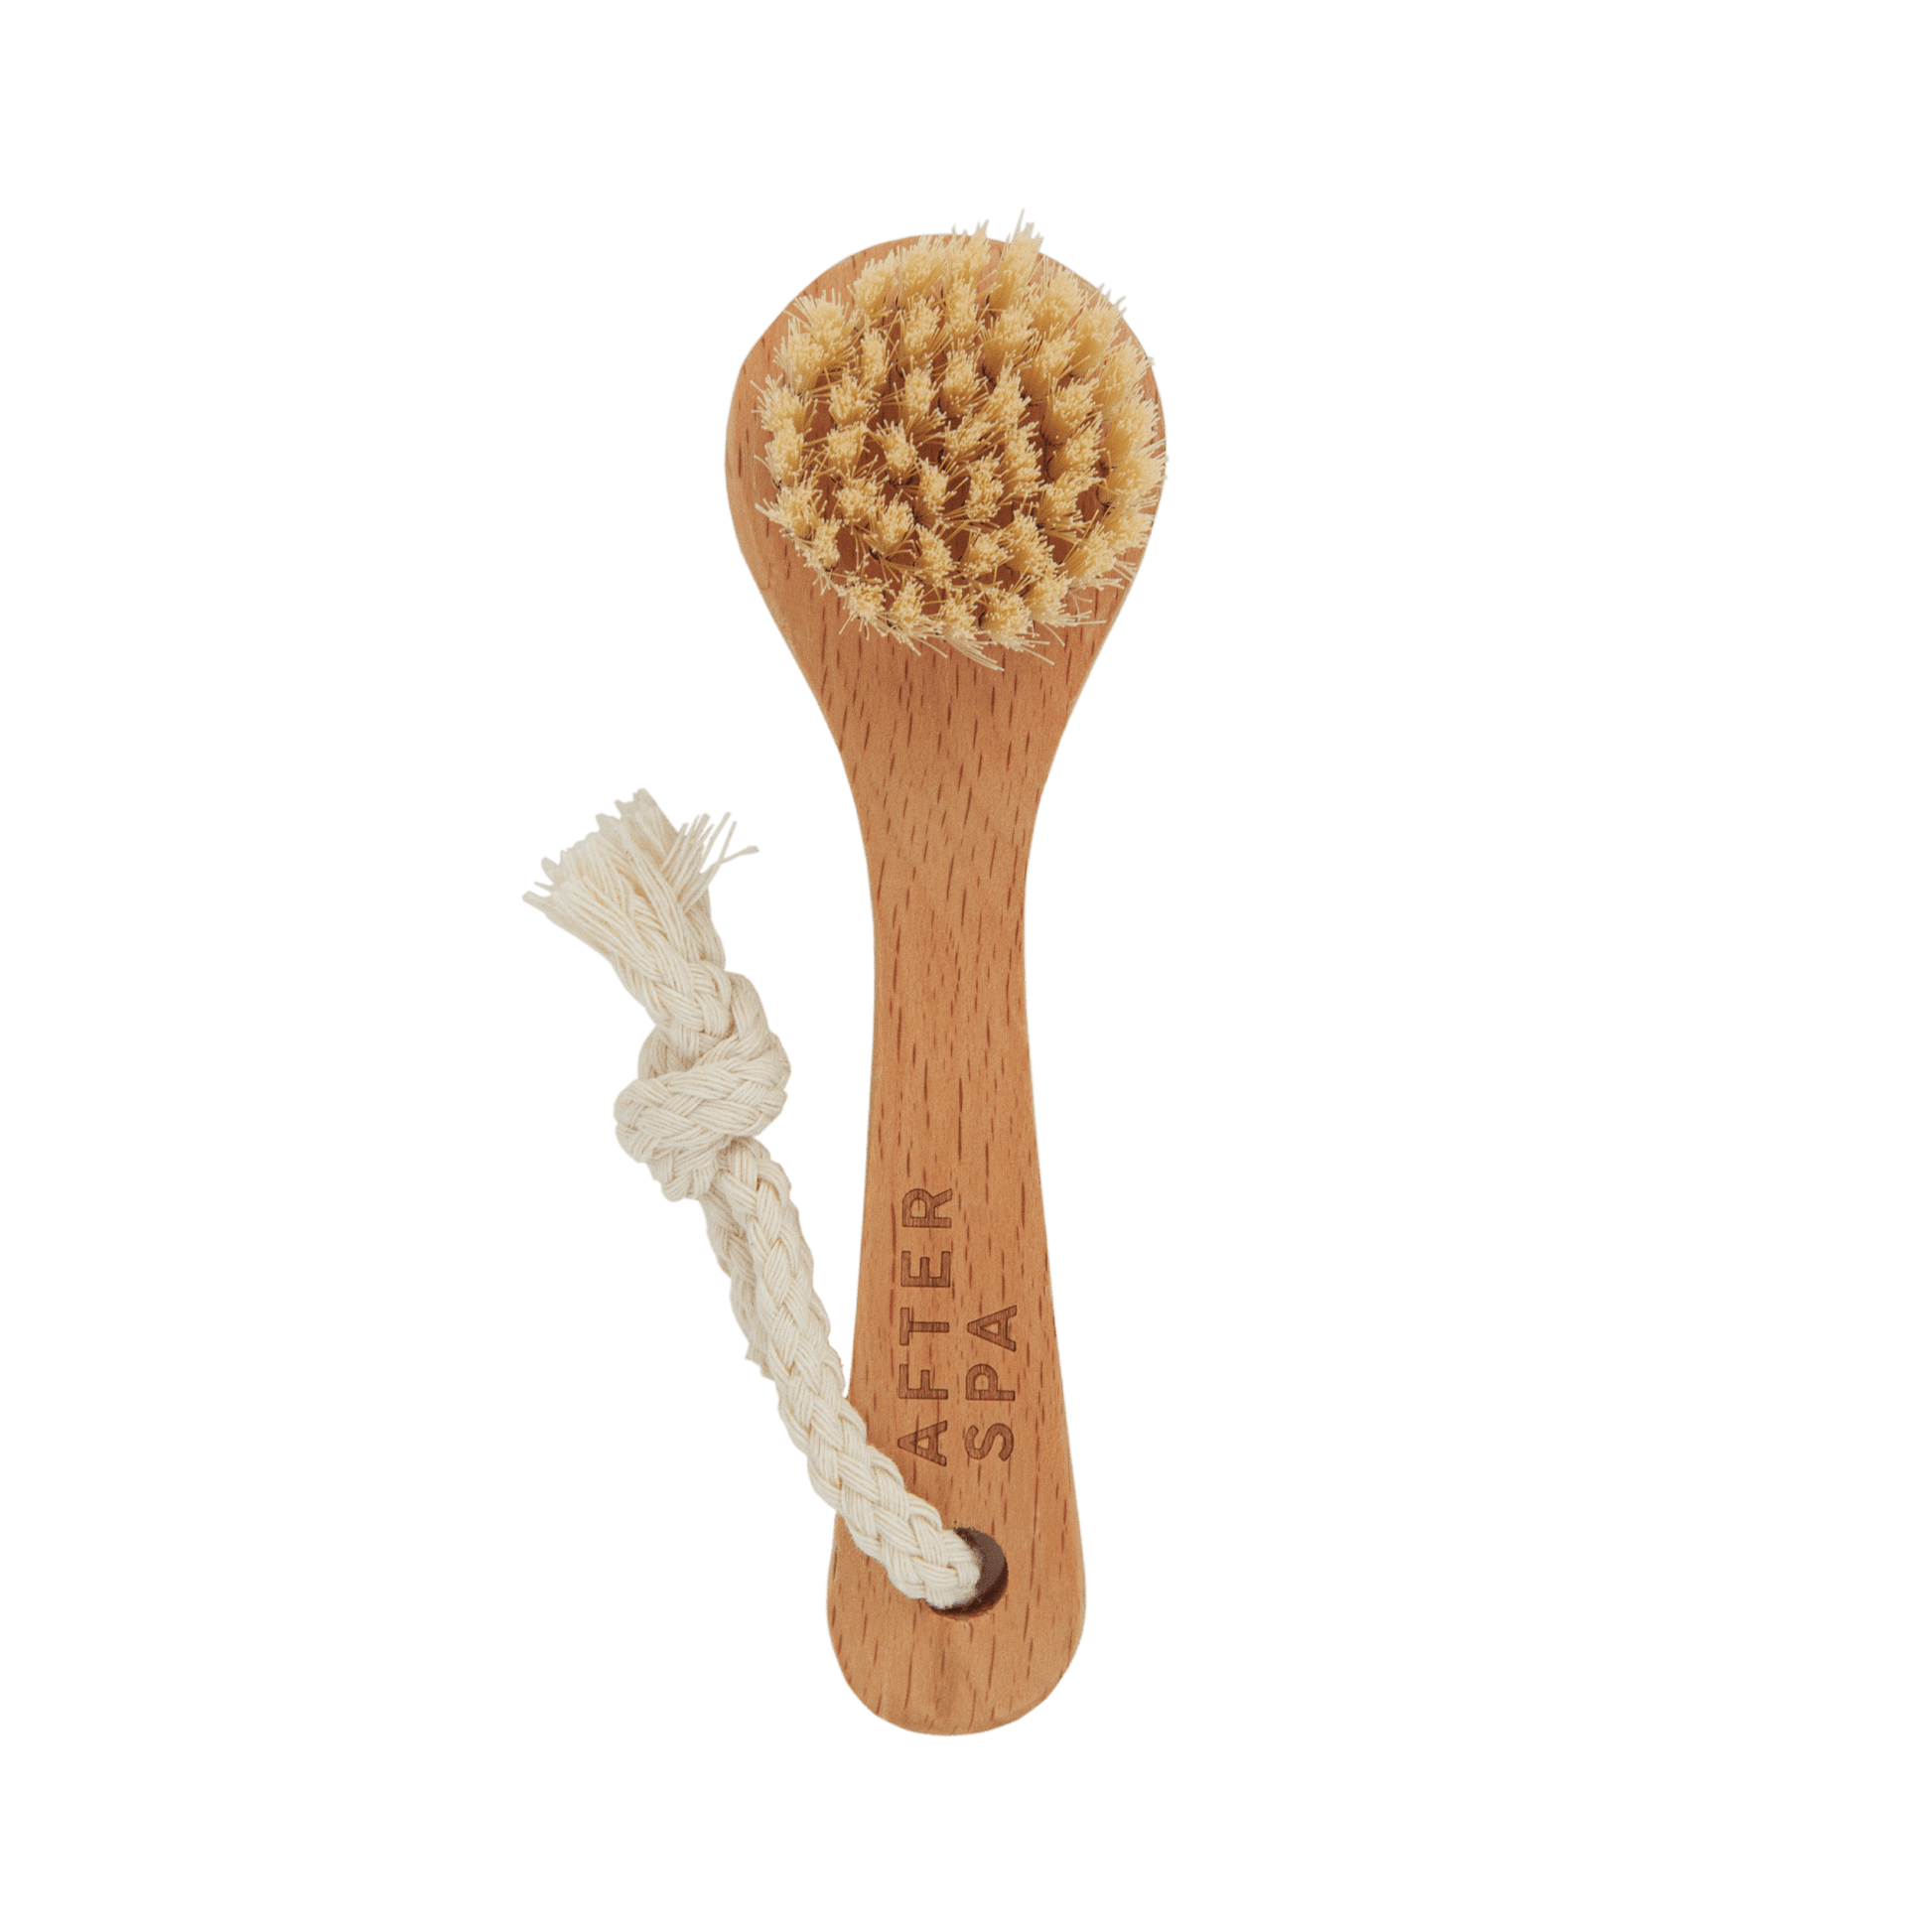 Afterspa Facial Dry Brush | To The Exfoliate The Face Gently